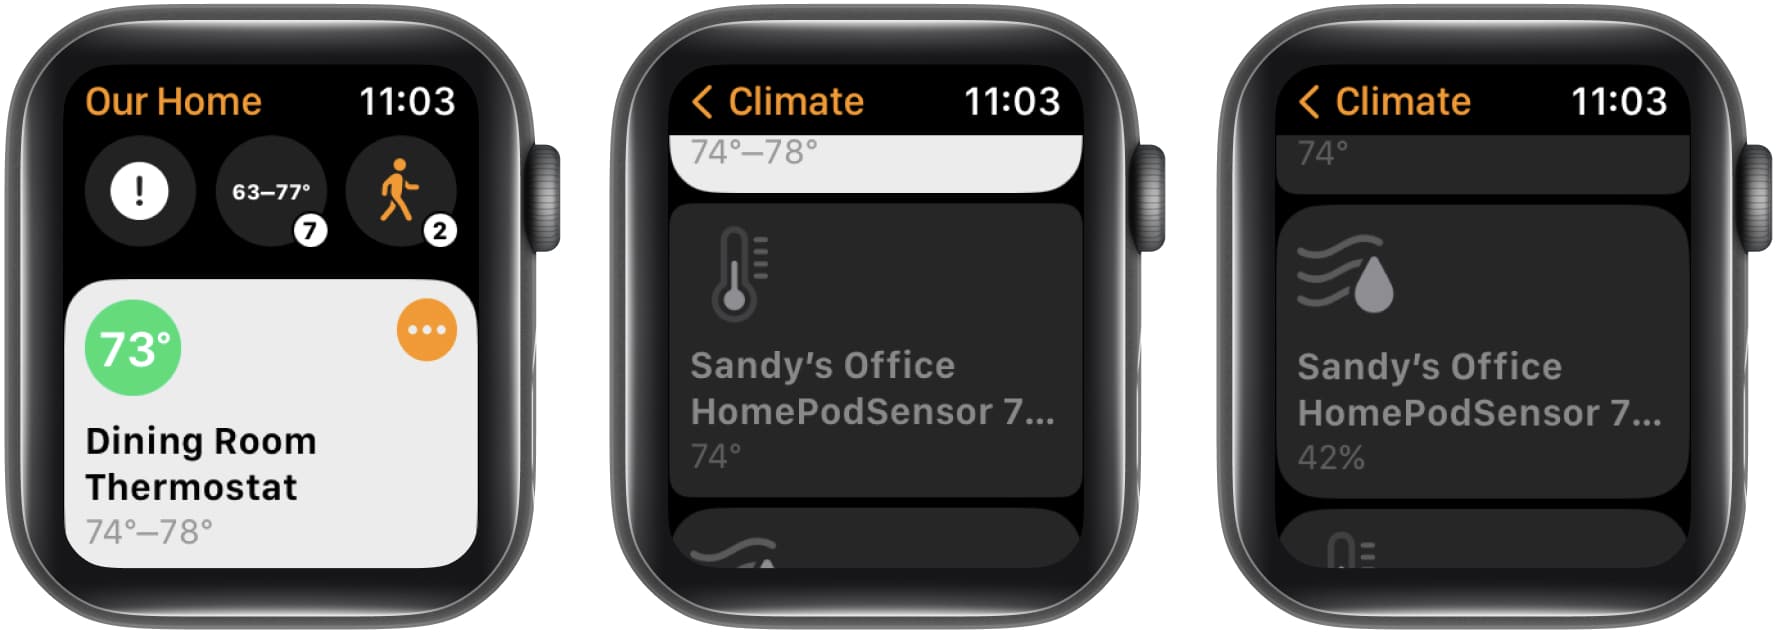 View climate readings on Apple Watch